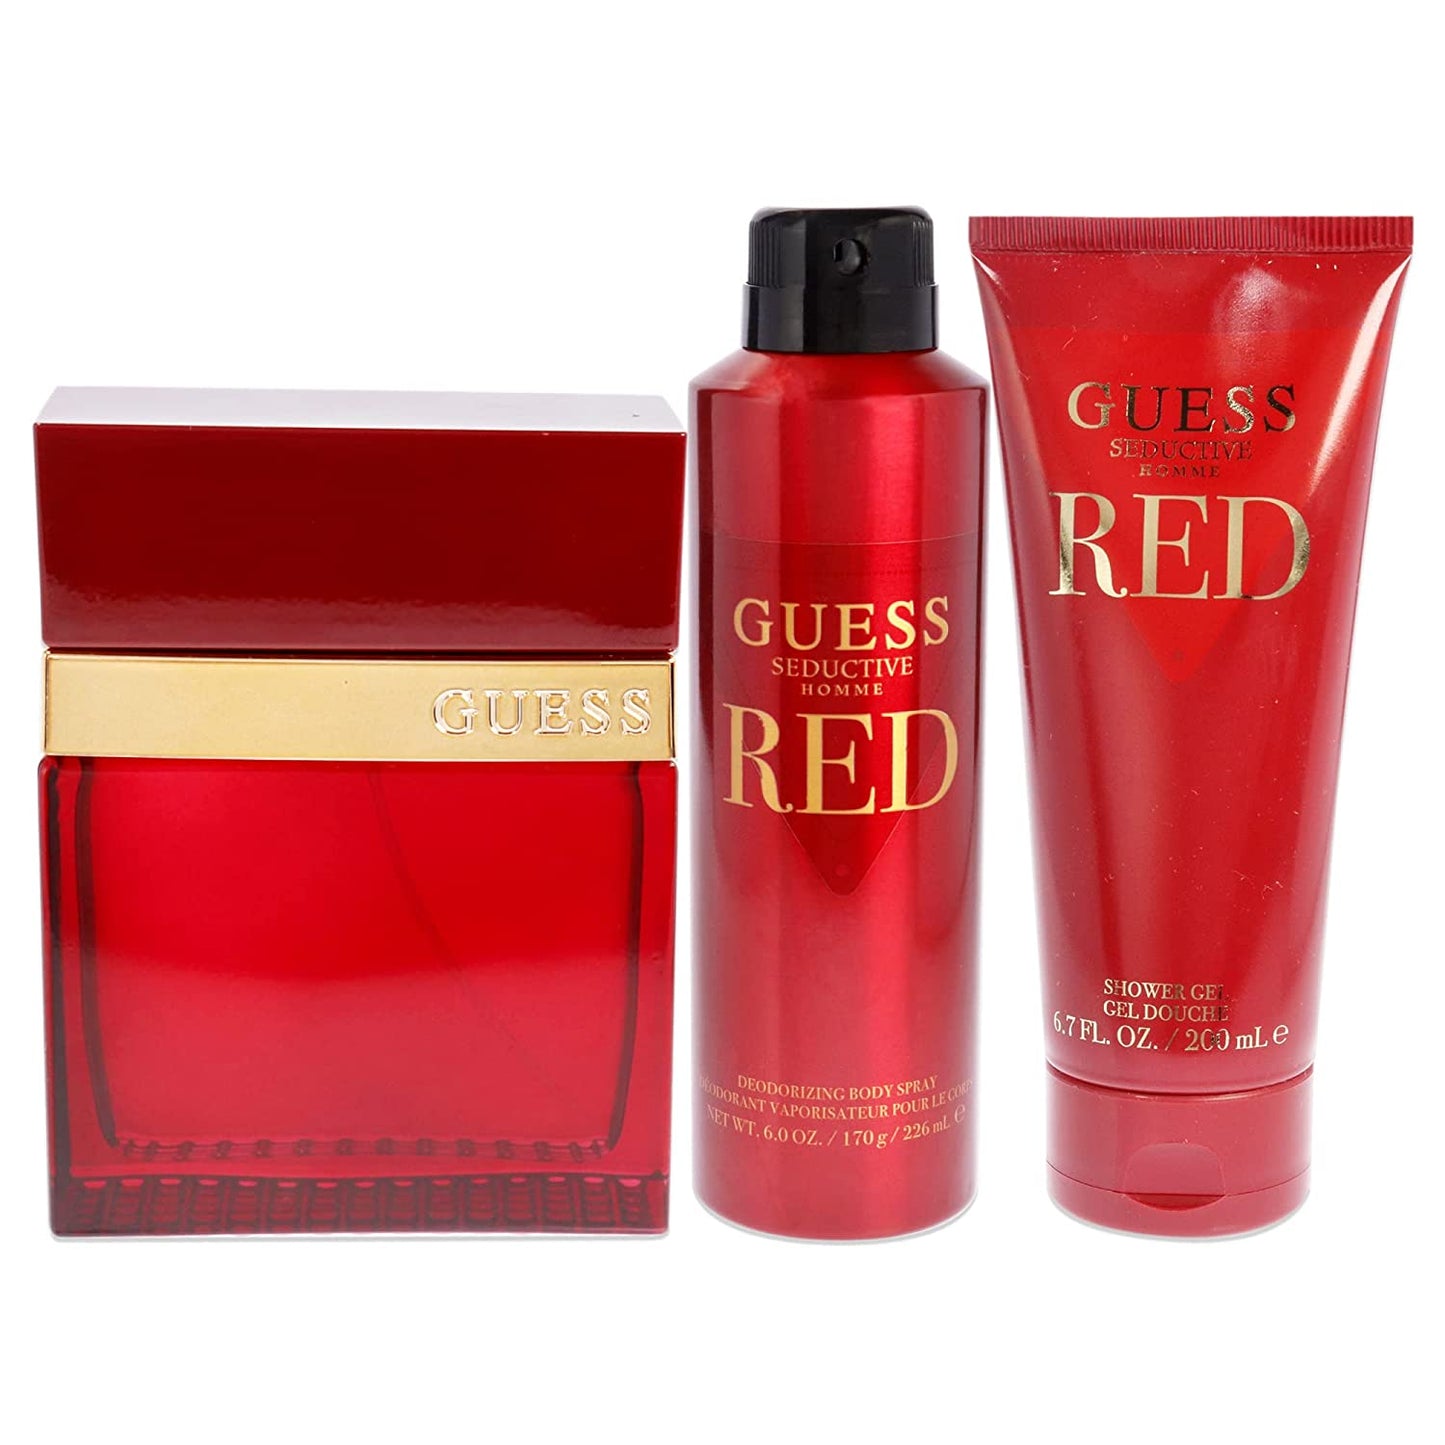 Guess Seductive Homme Red EDT Gift Set (3PC) - Perfume Planet 